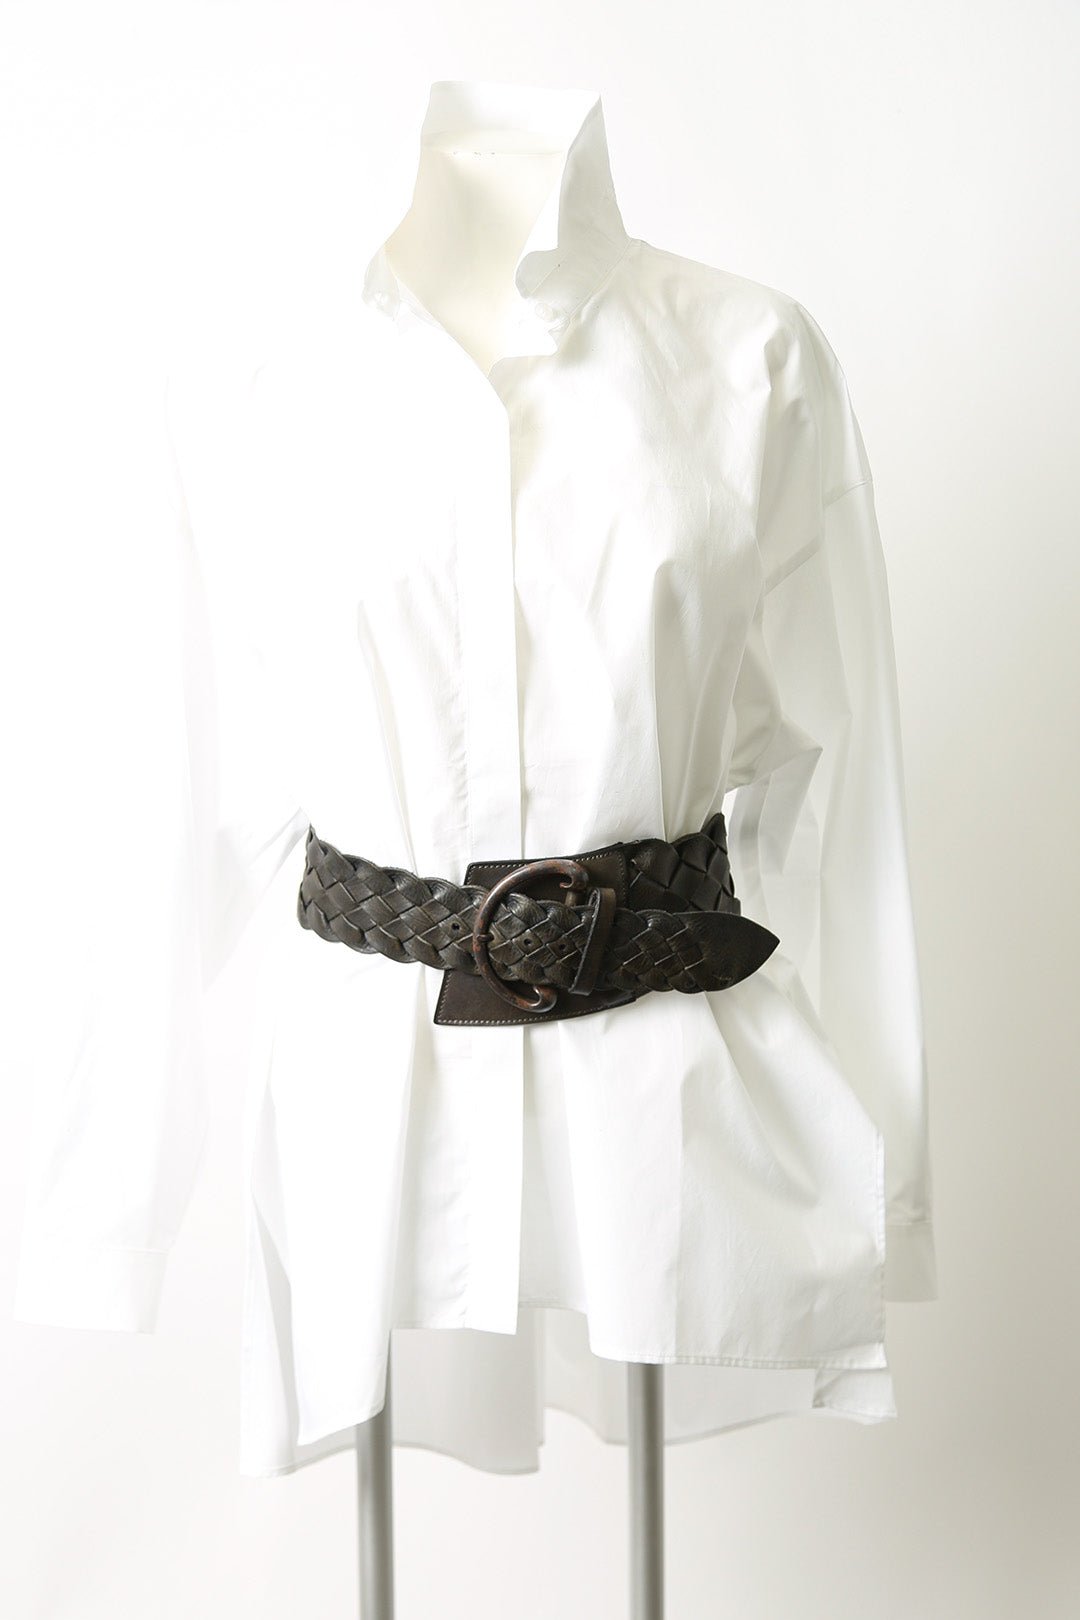 GIACOMO WOVEN BELT IN LEATHER - Jarbo